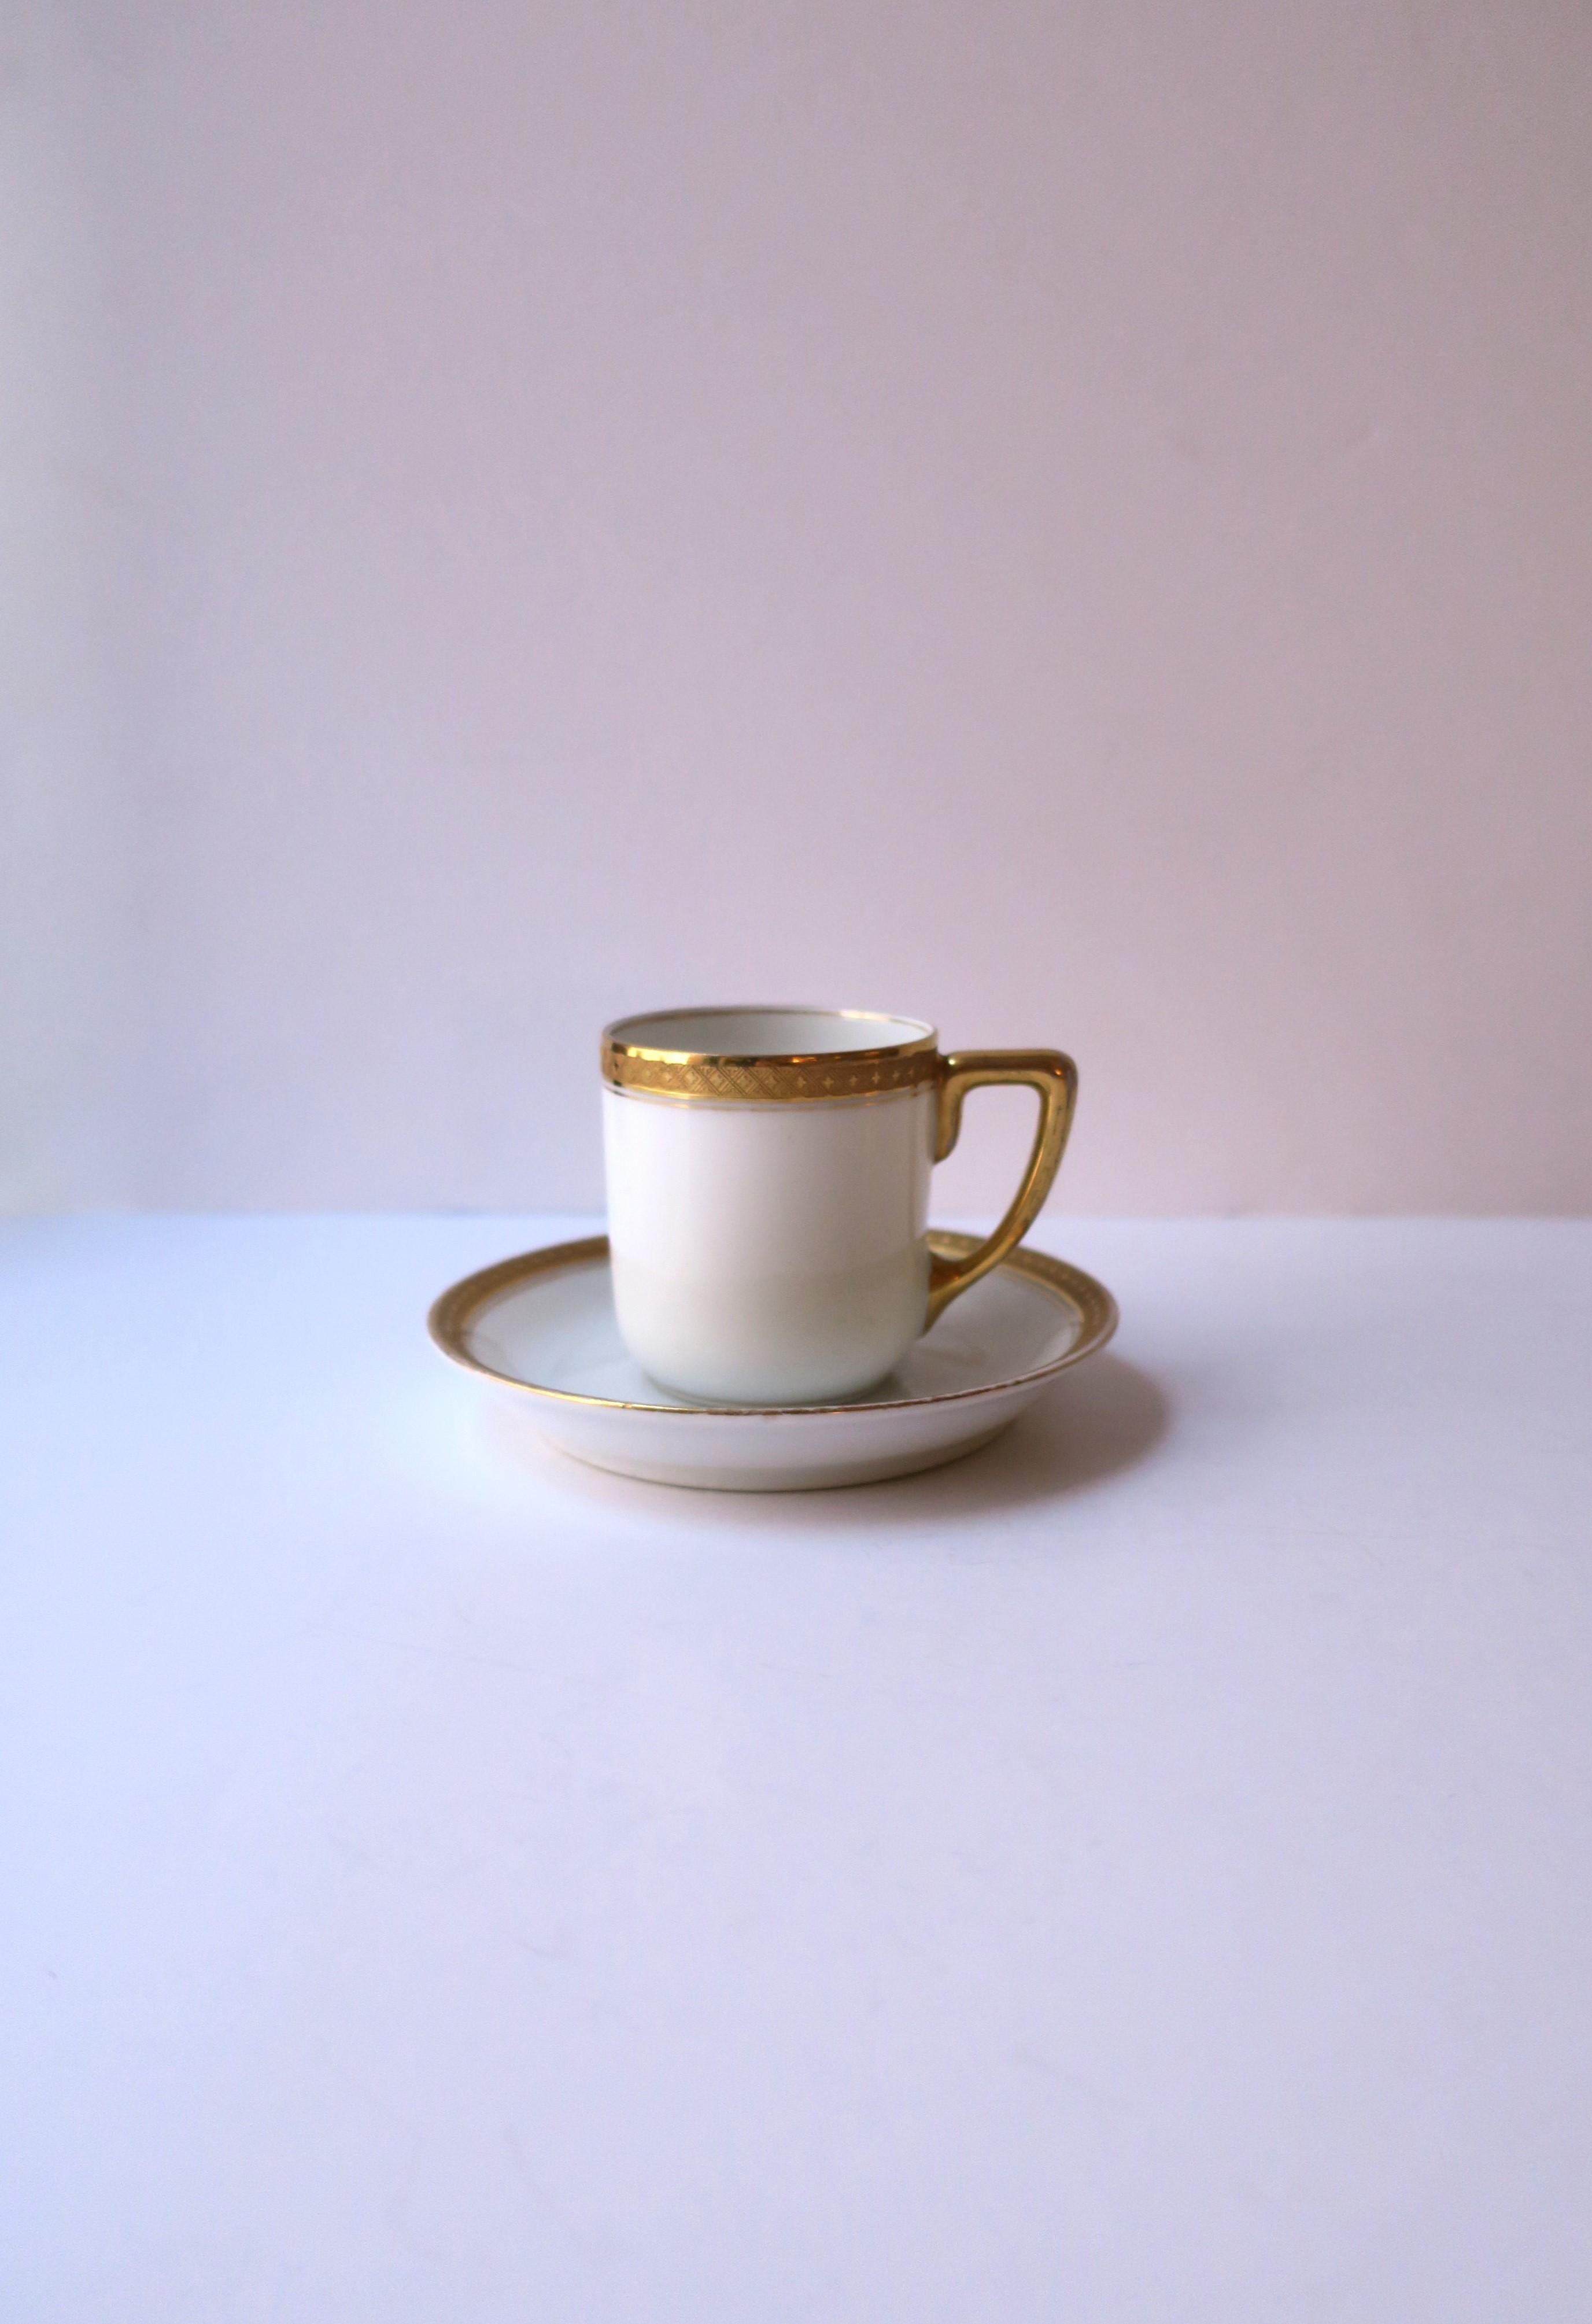 Gilt Porcelain White and Gold Coffee Espresso Tea Demitasse Cup and Saucer Rosenthal For Sale